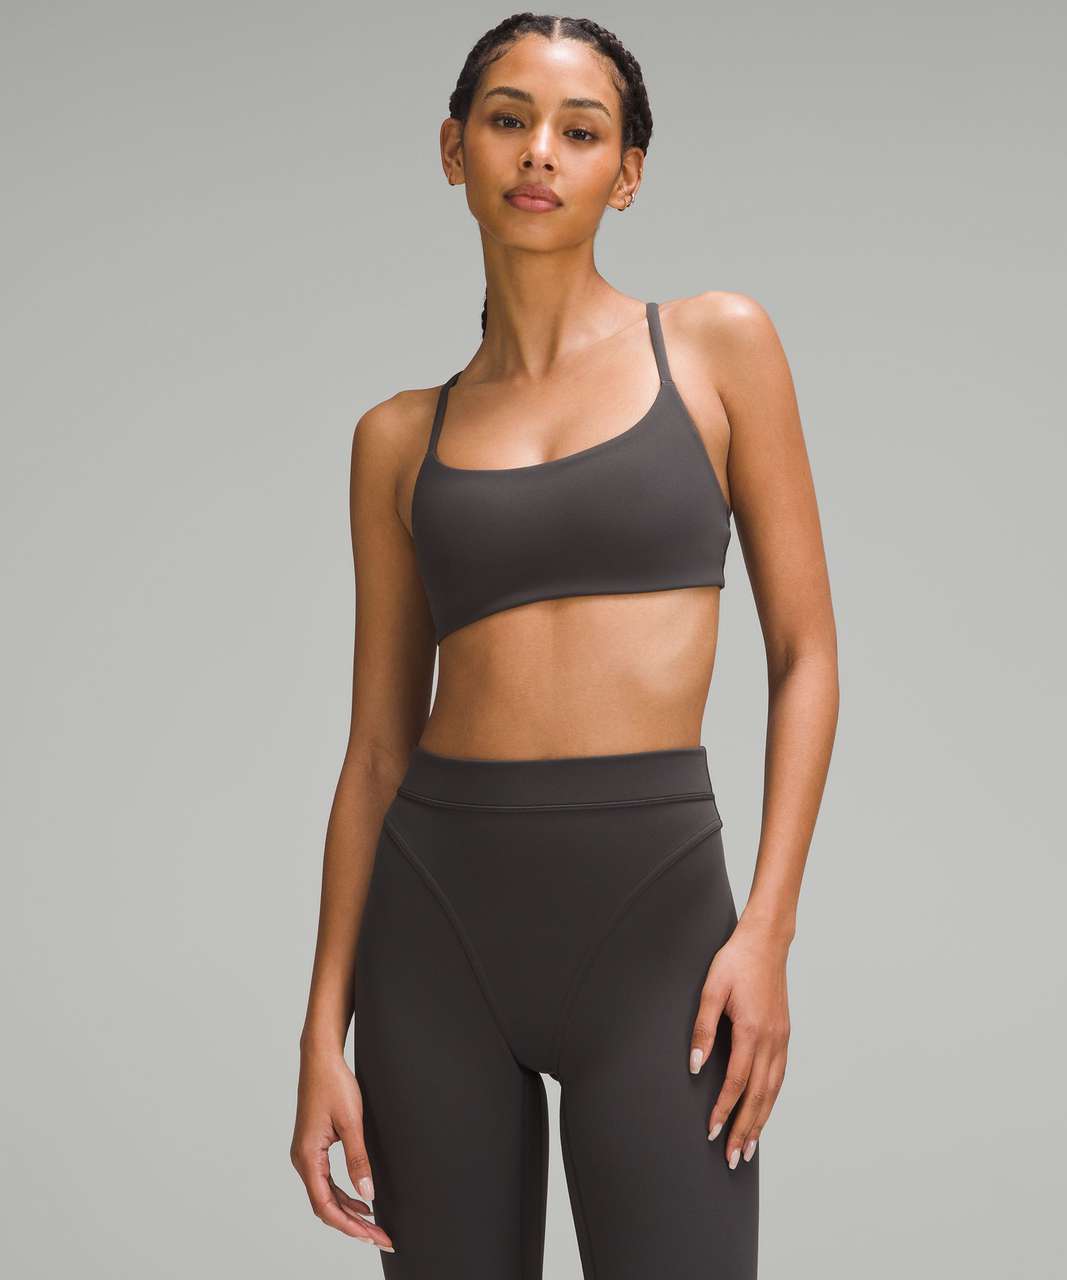 Lululemon Wunder Train Strappy Racer Bra Light Support, A/B Cup *Twill - Graphite Grey